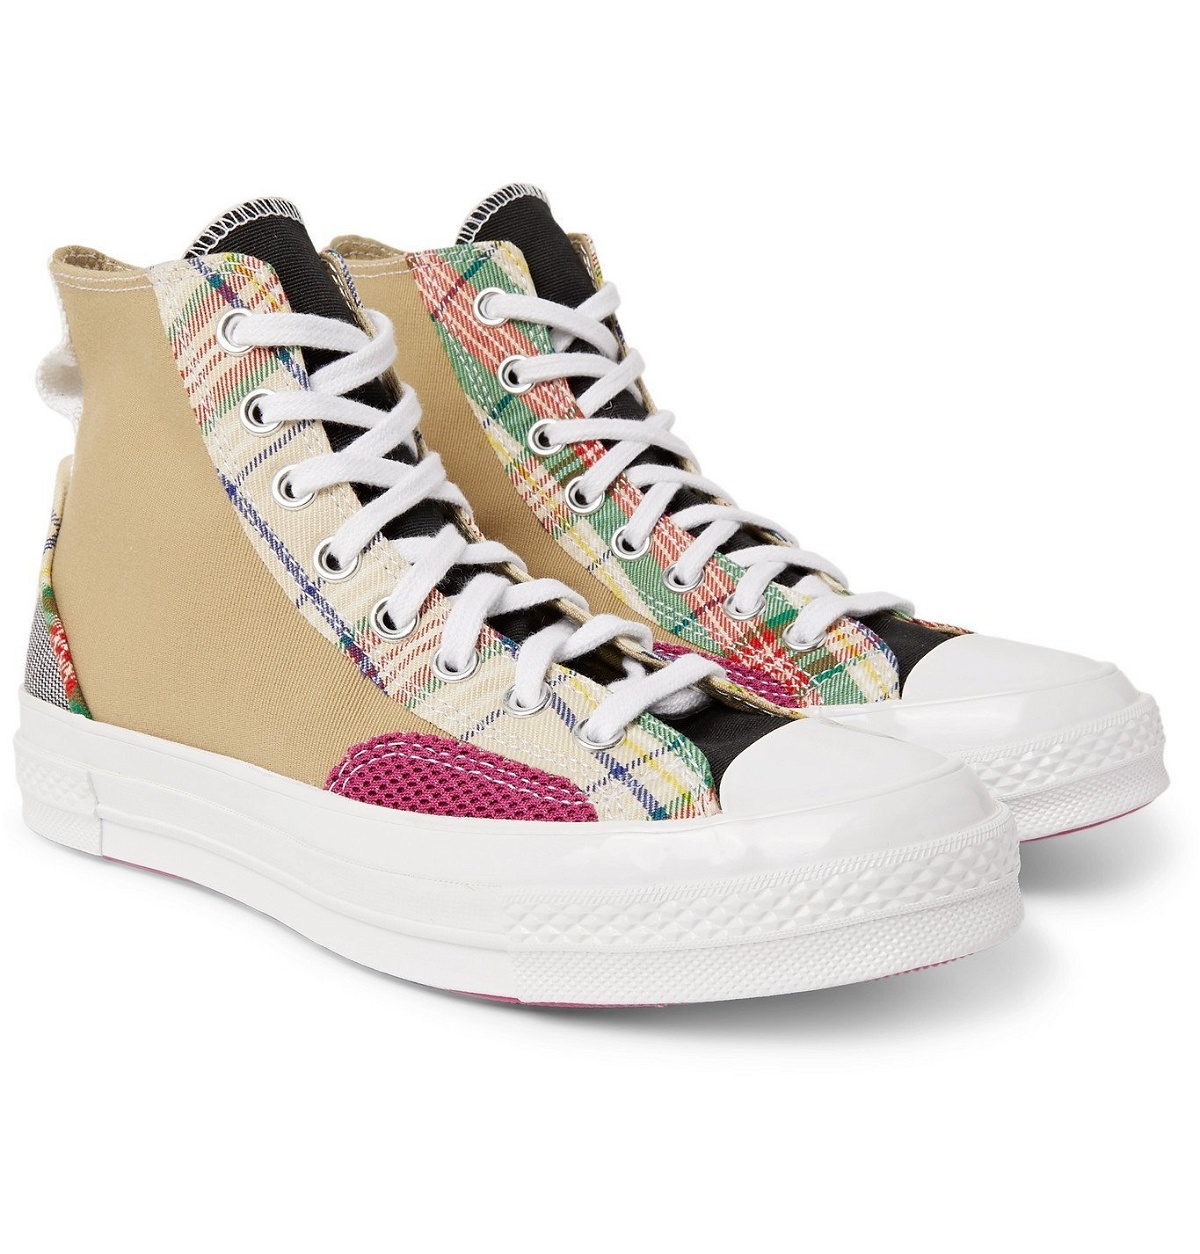 Converse - Hacked Fashion 70 Mesh-Trimmed Canvas Sneakers - Multi Converse